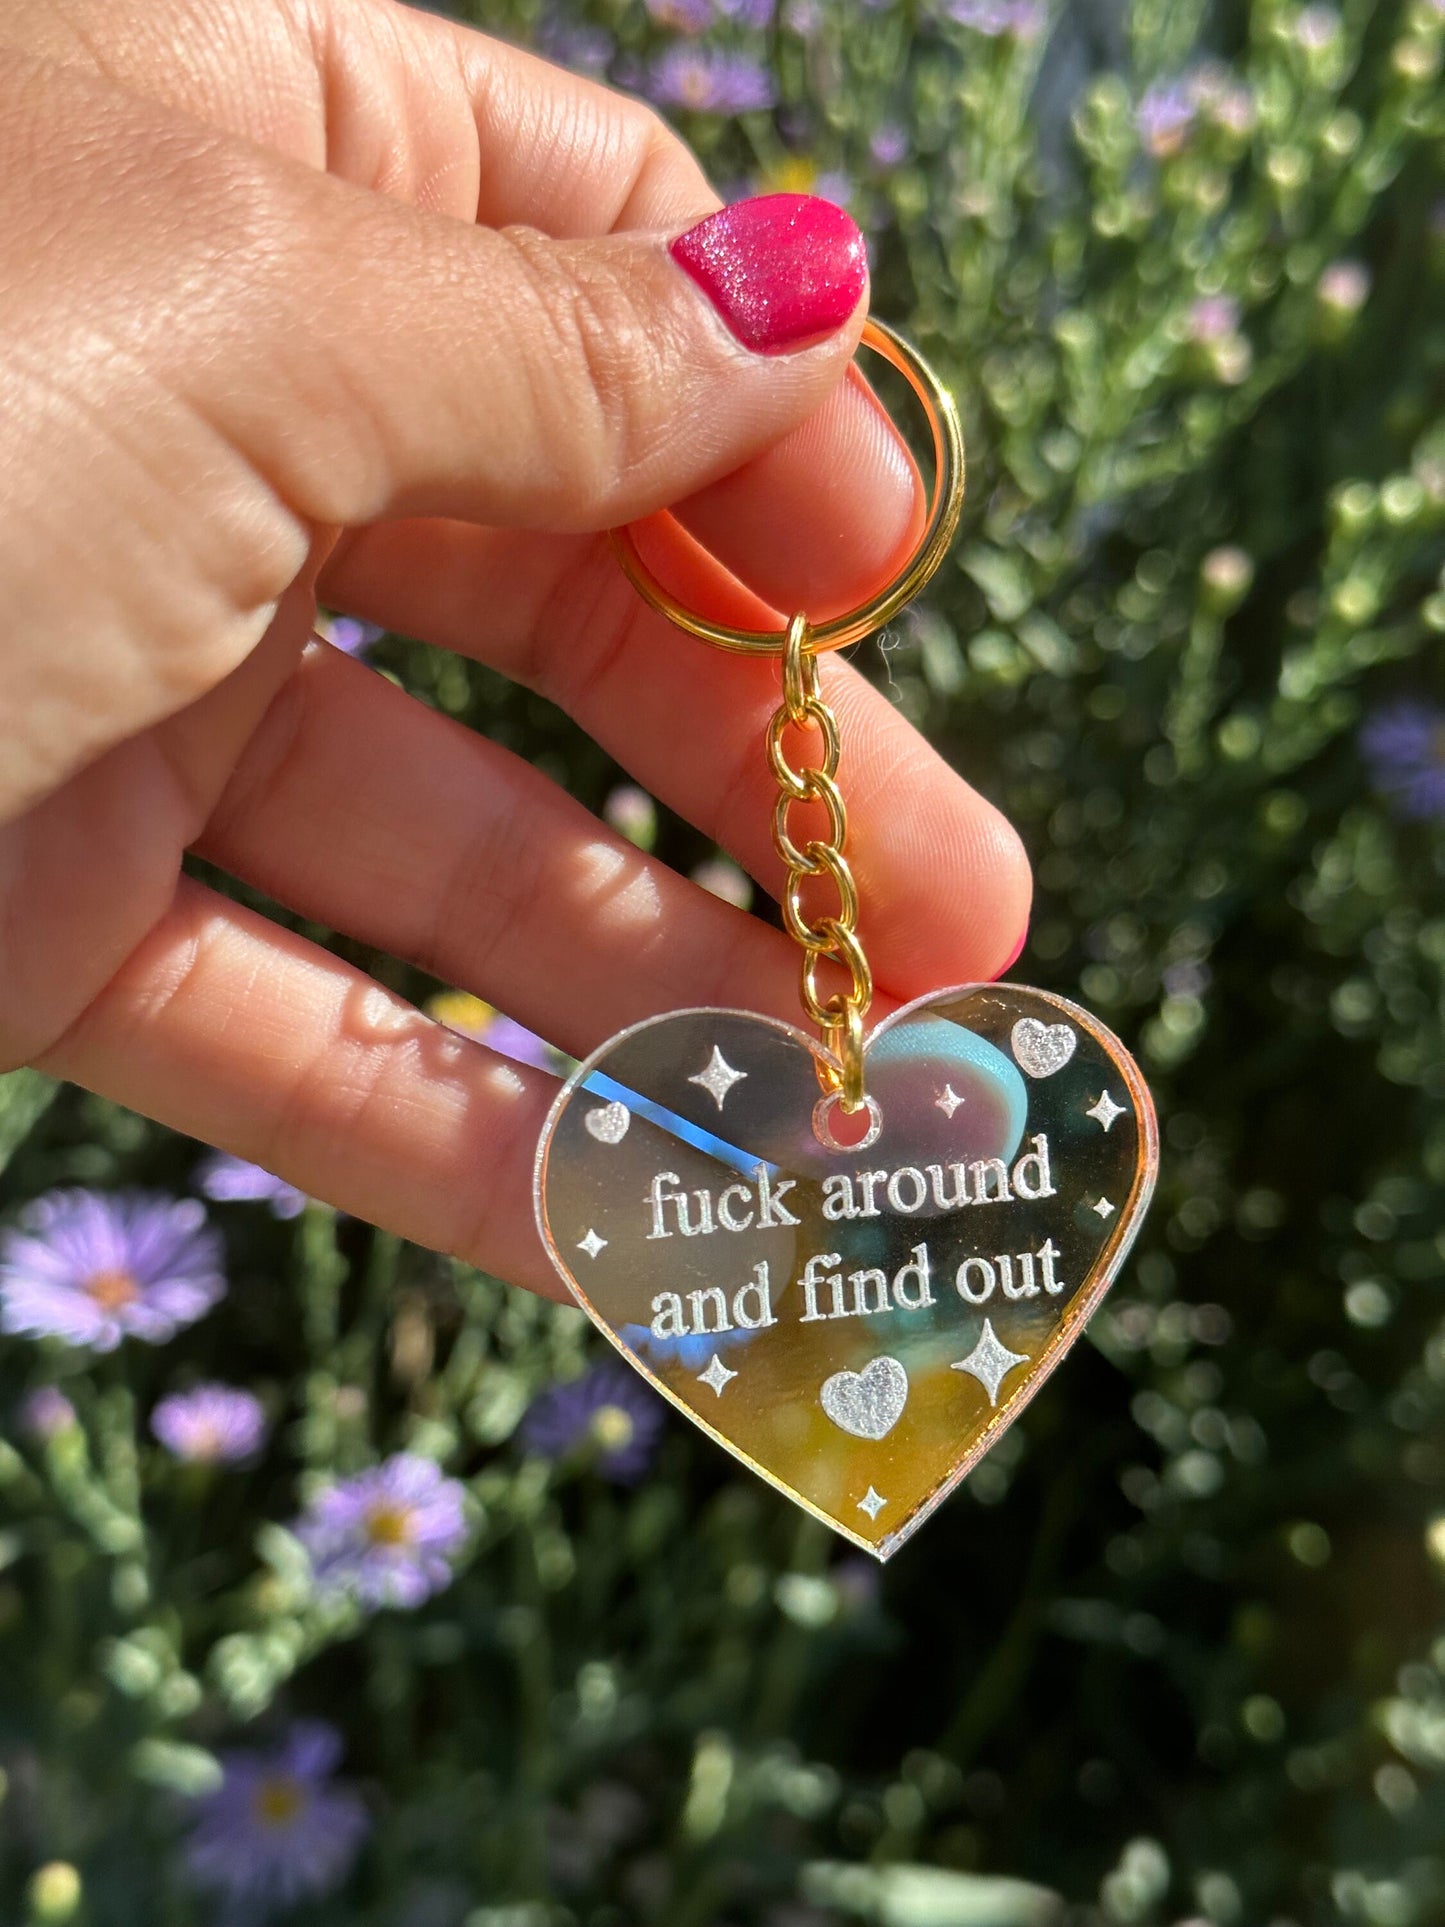 Fuck Around And Find Out Iridescent Acrylic Keychain